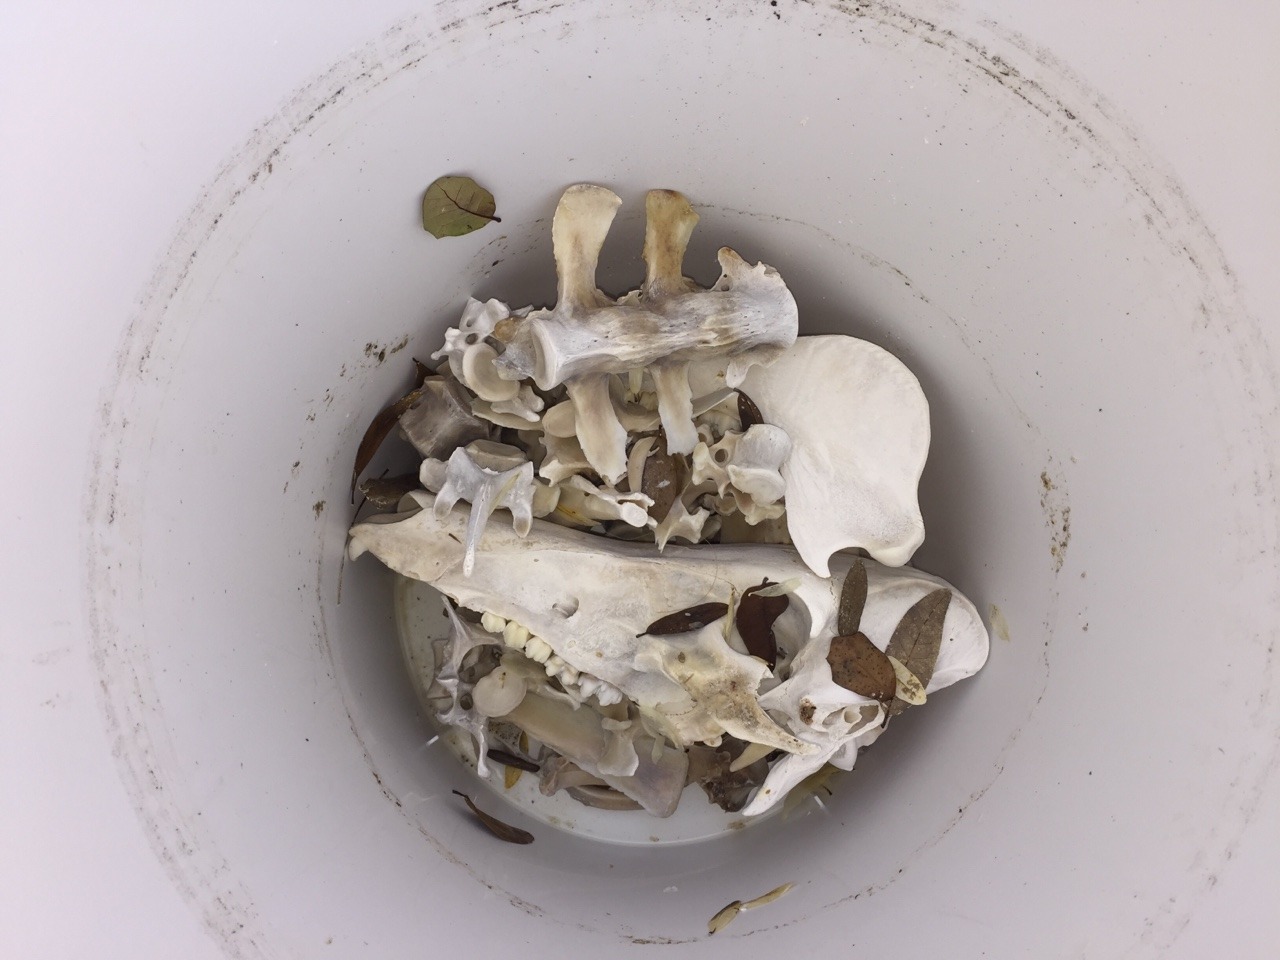 Photo of a white bucket with a bunch of animal bones at the bottom including a pig skull and vertebrae